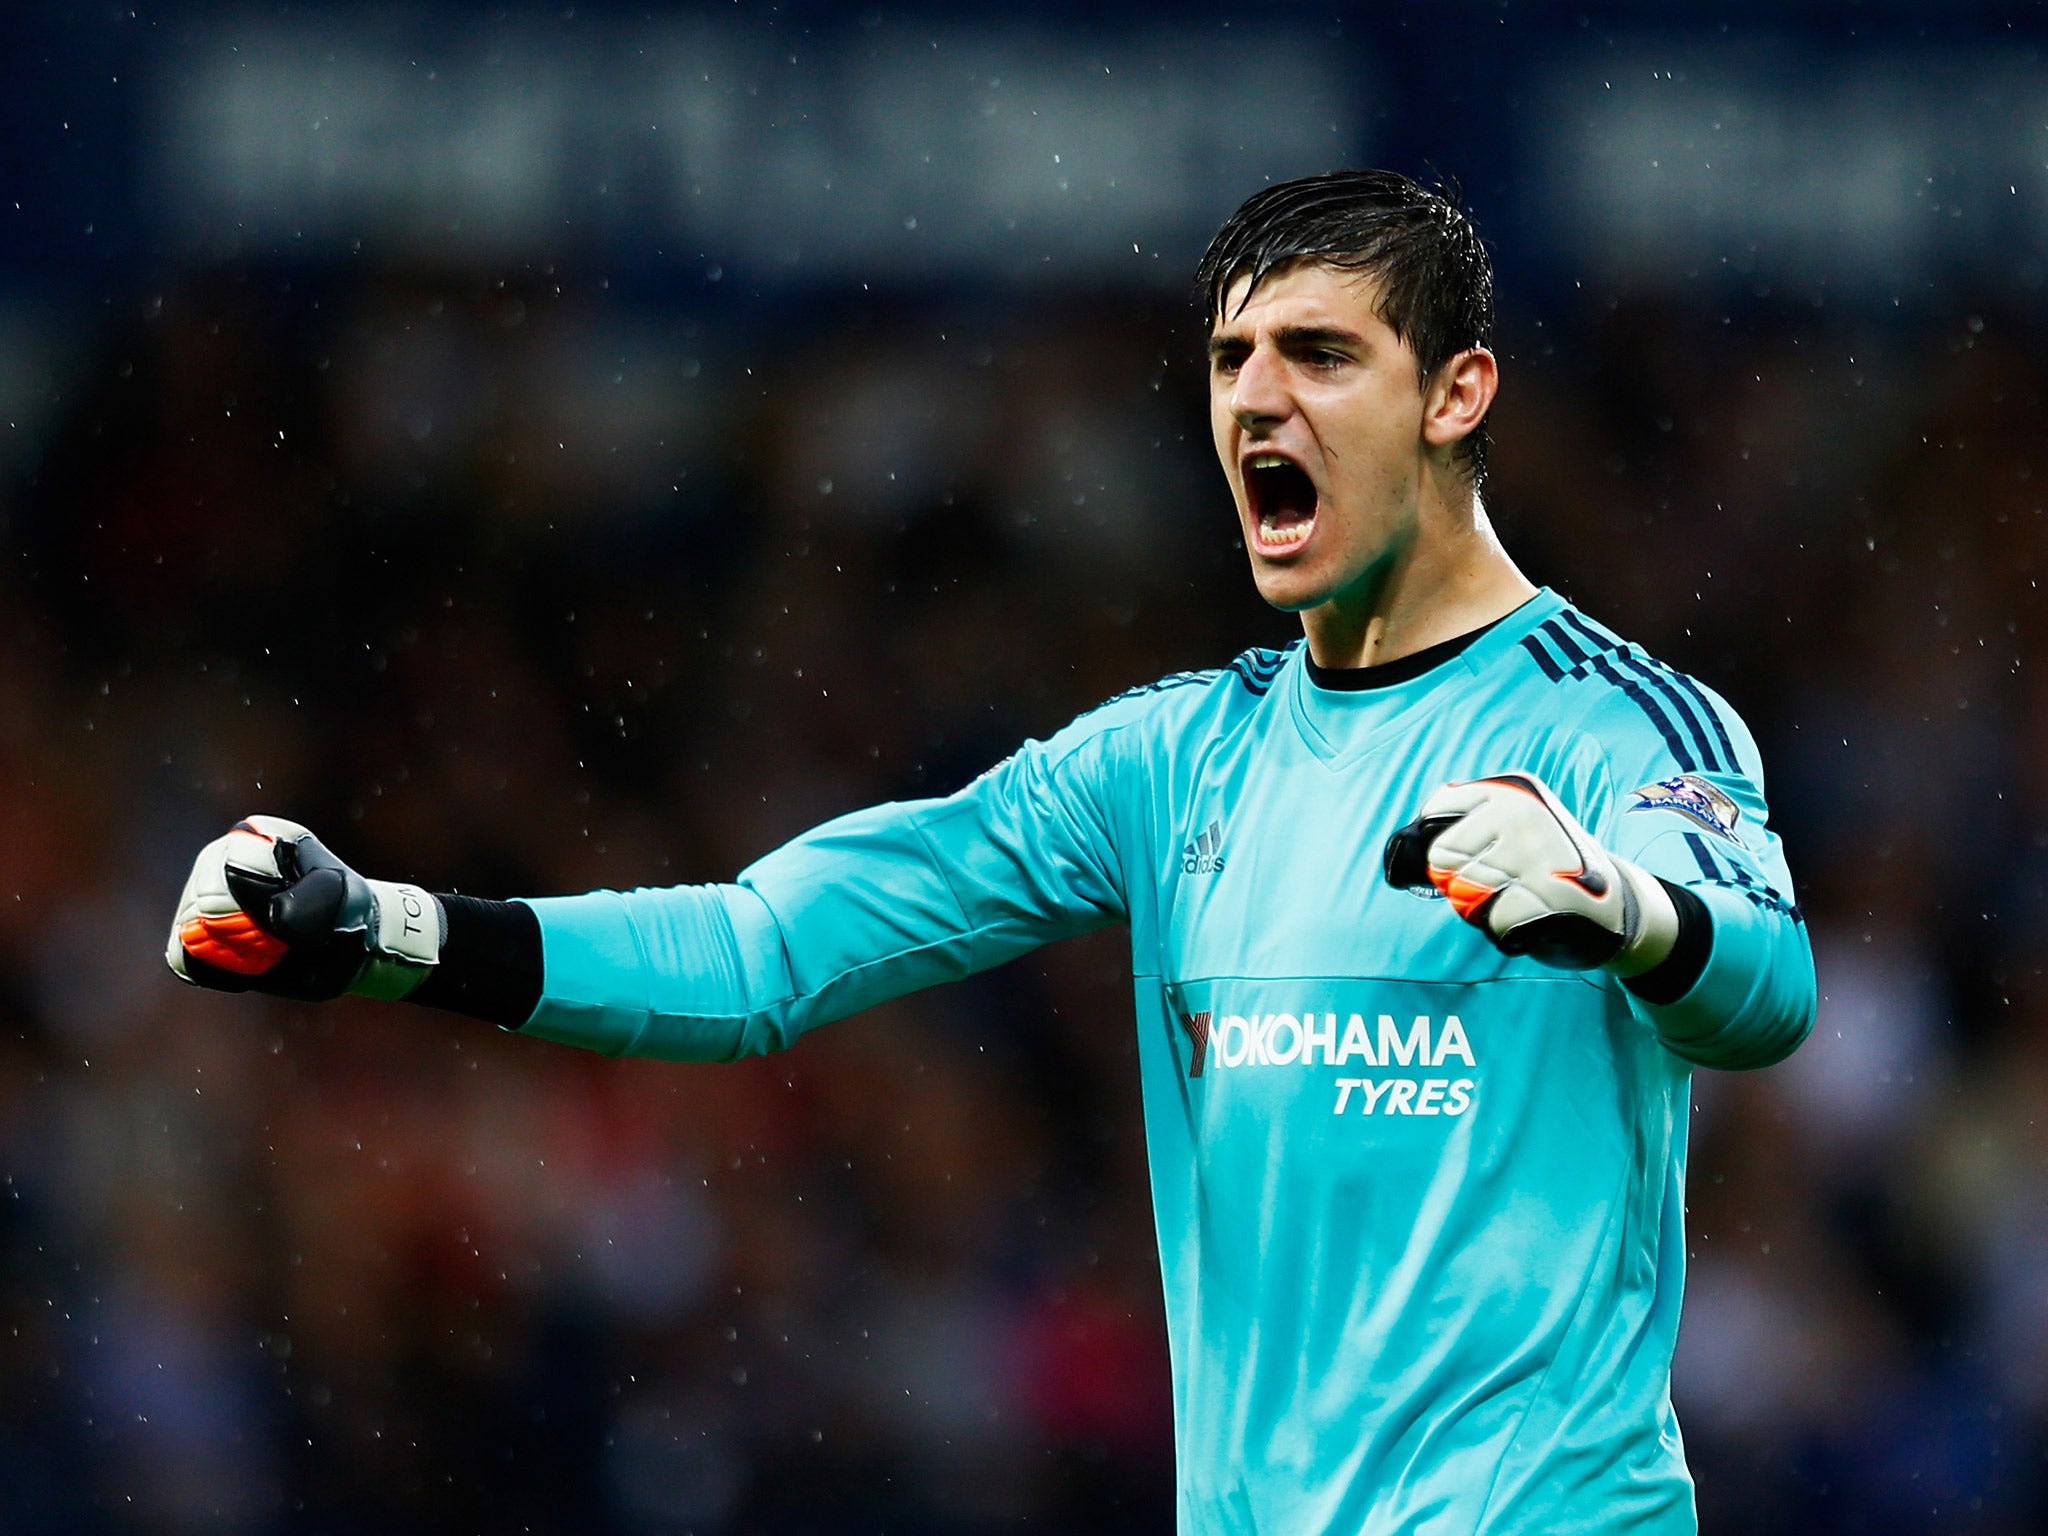 Chelsea can call on Thibaut Courtois this weekend